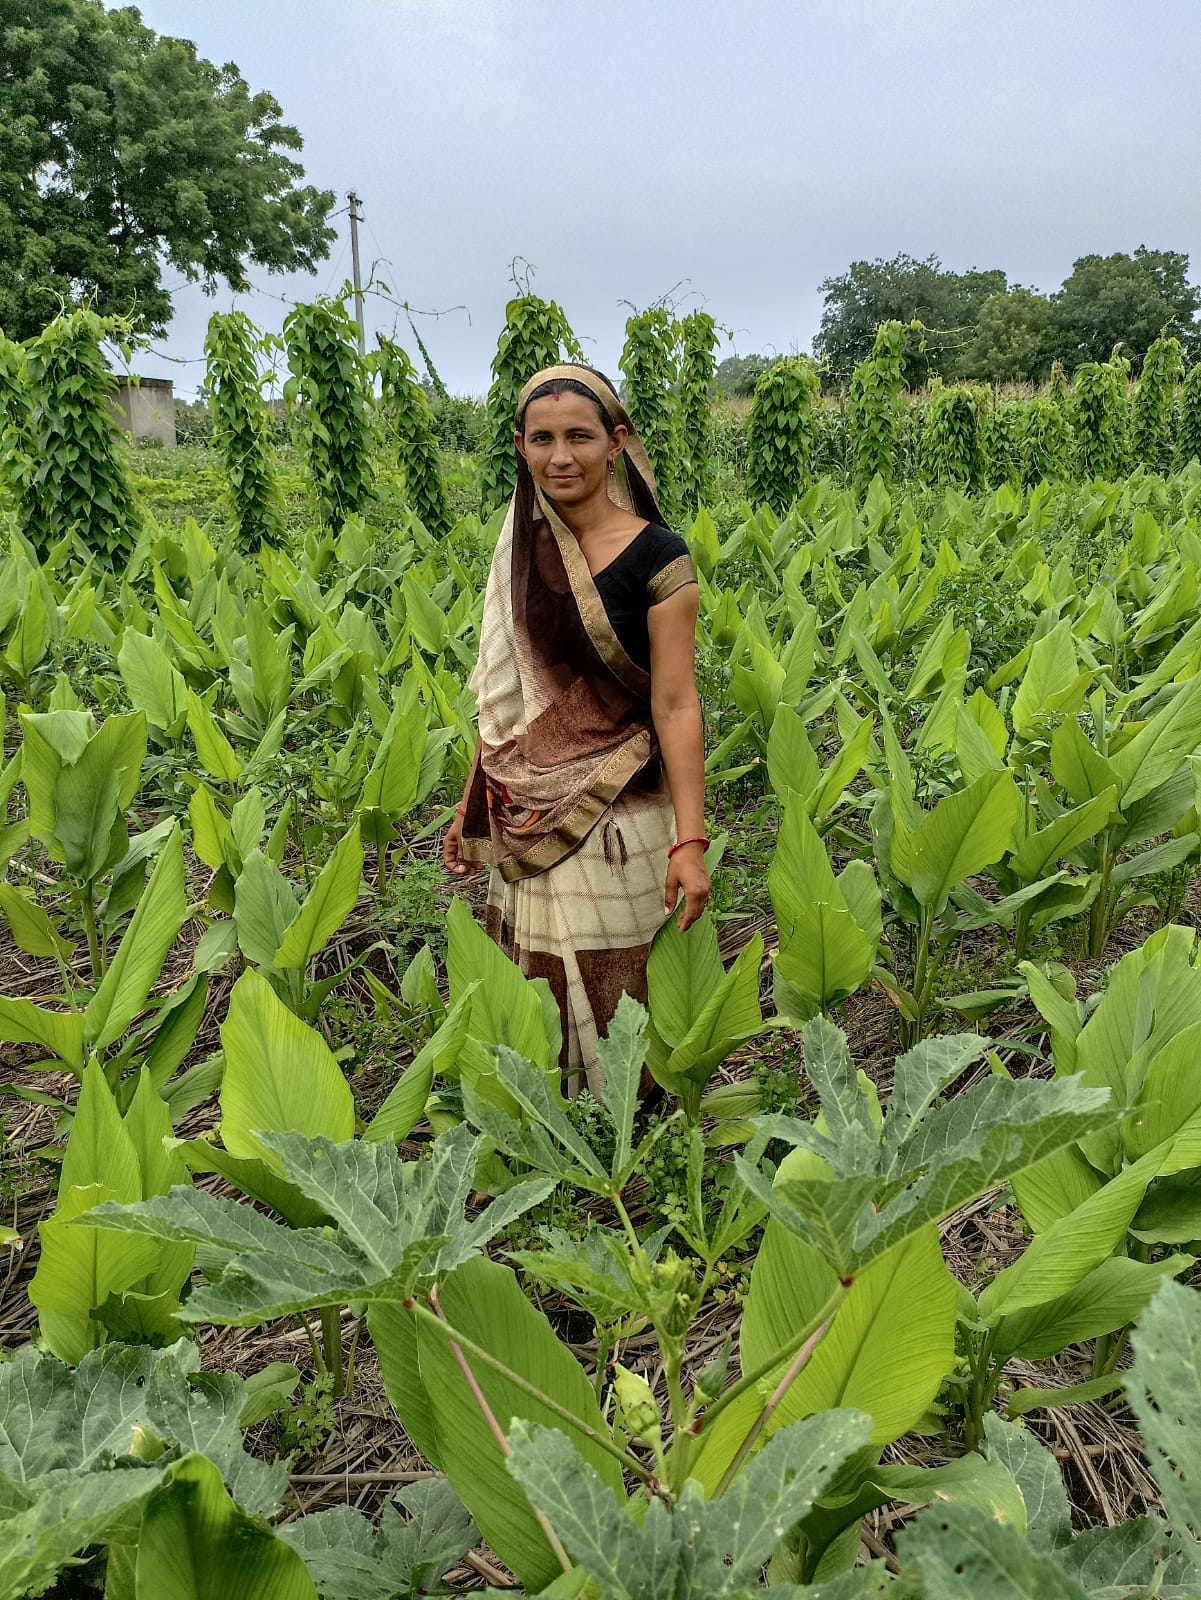 Veena's income has increased significantly due to turmeric cultivation